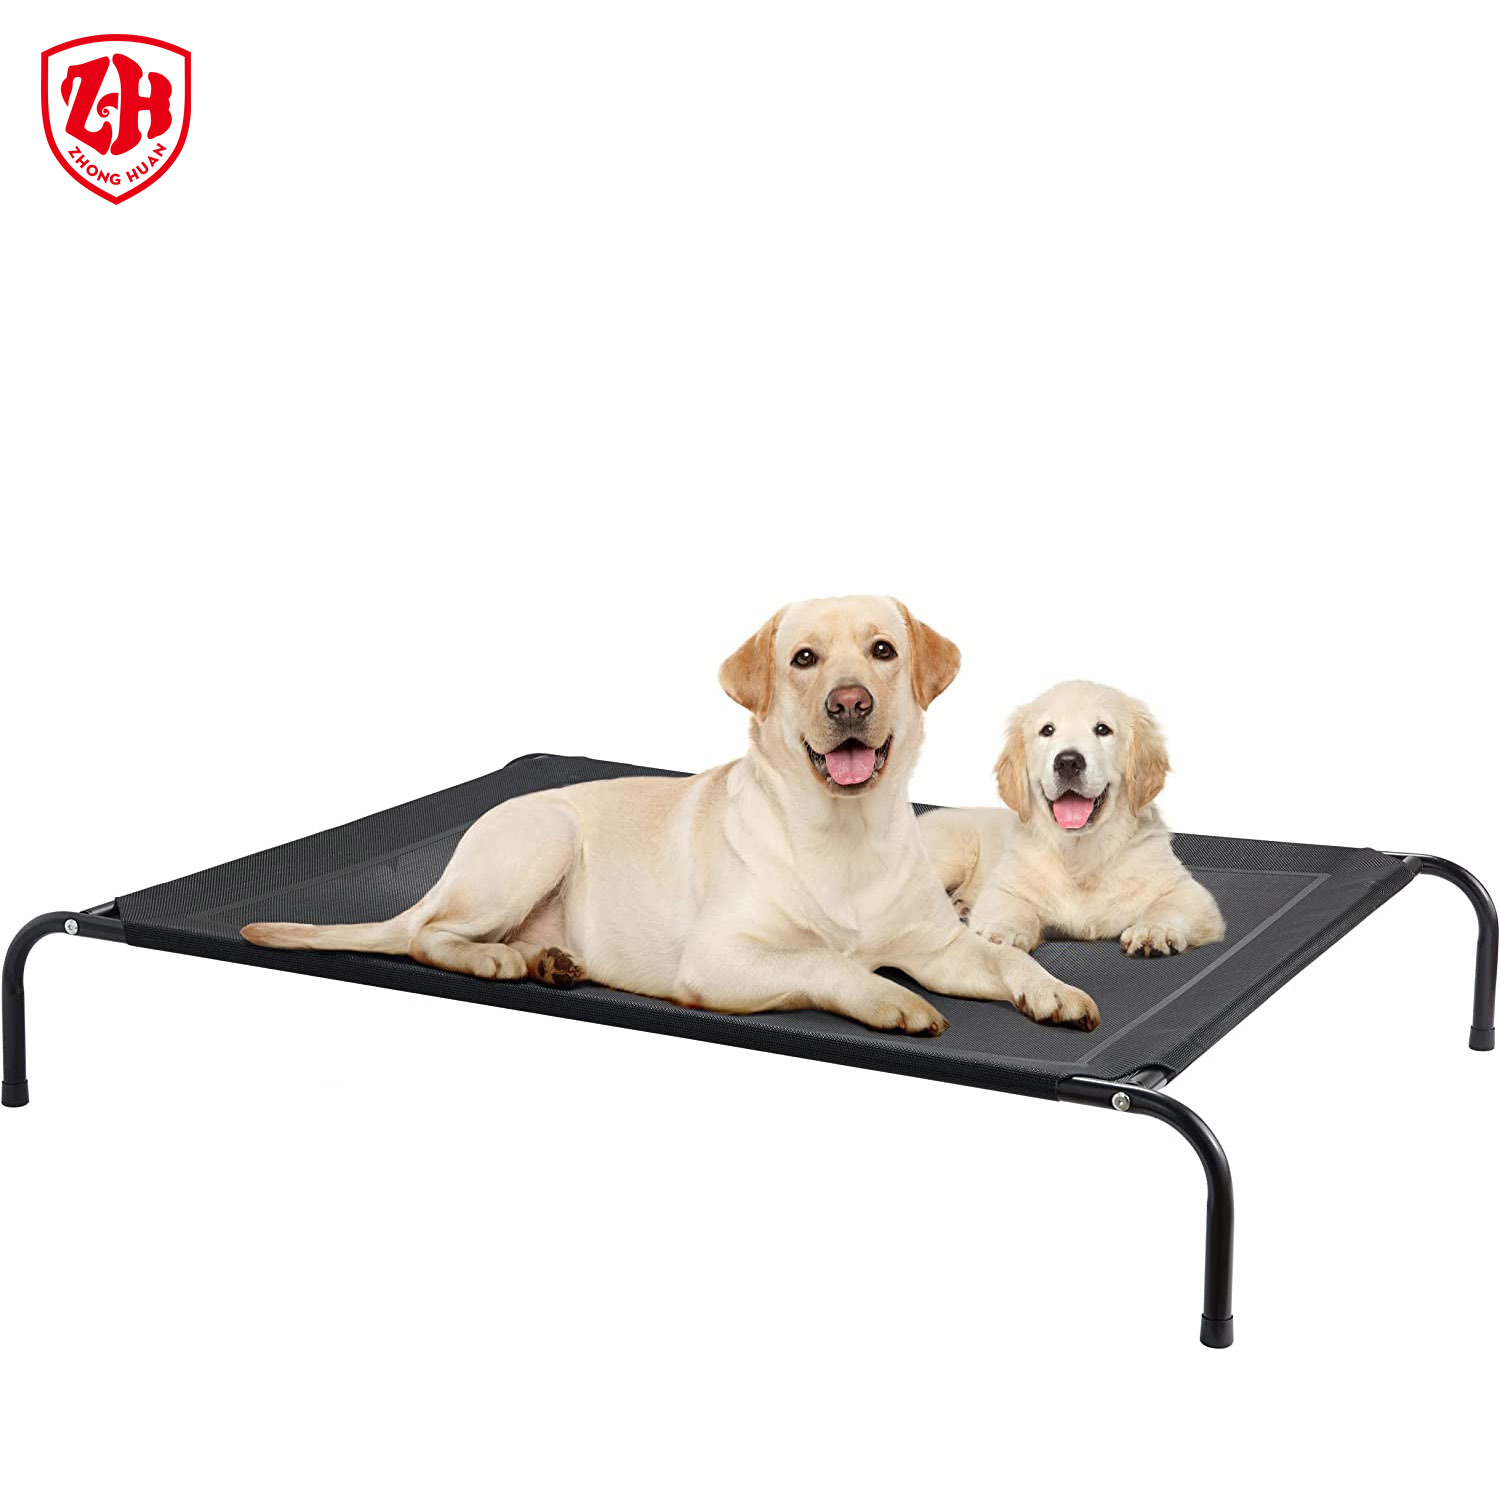 New Moisture Proof Pad Extra Large Pet Beds Jumbo Square Dog Cot Elevated Dog Bed